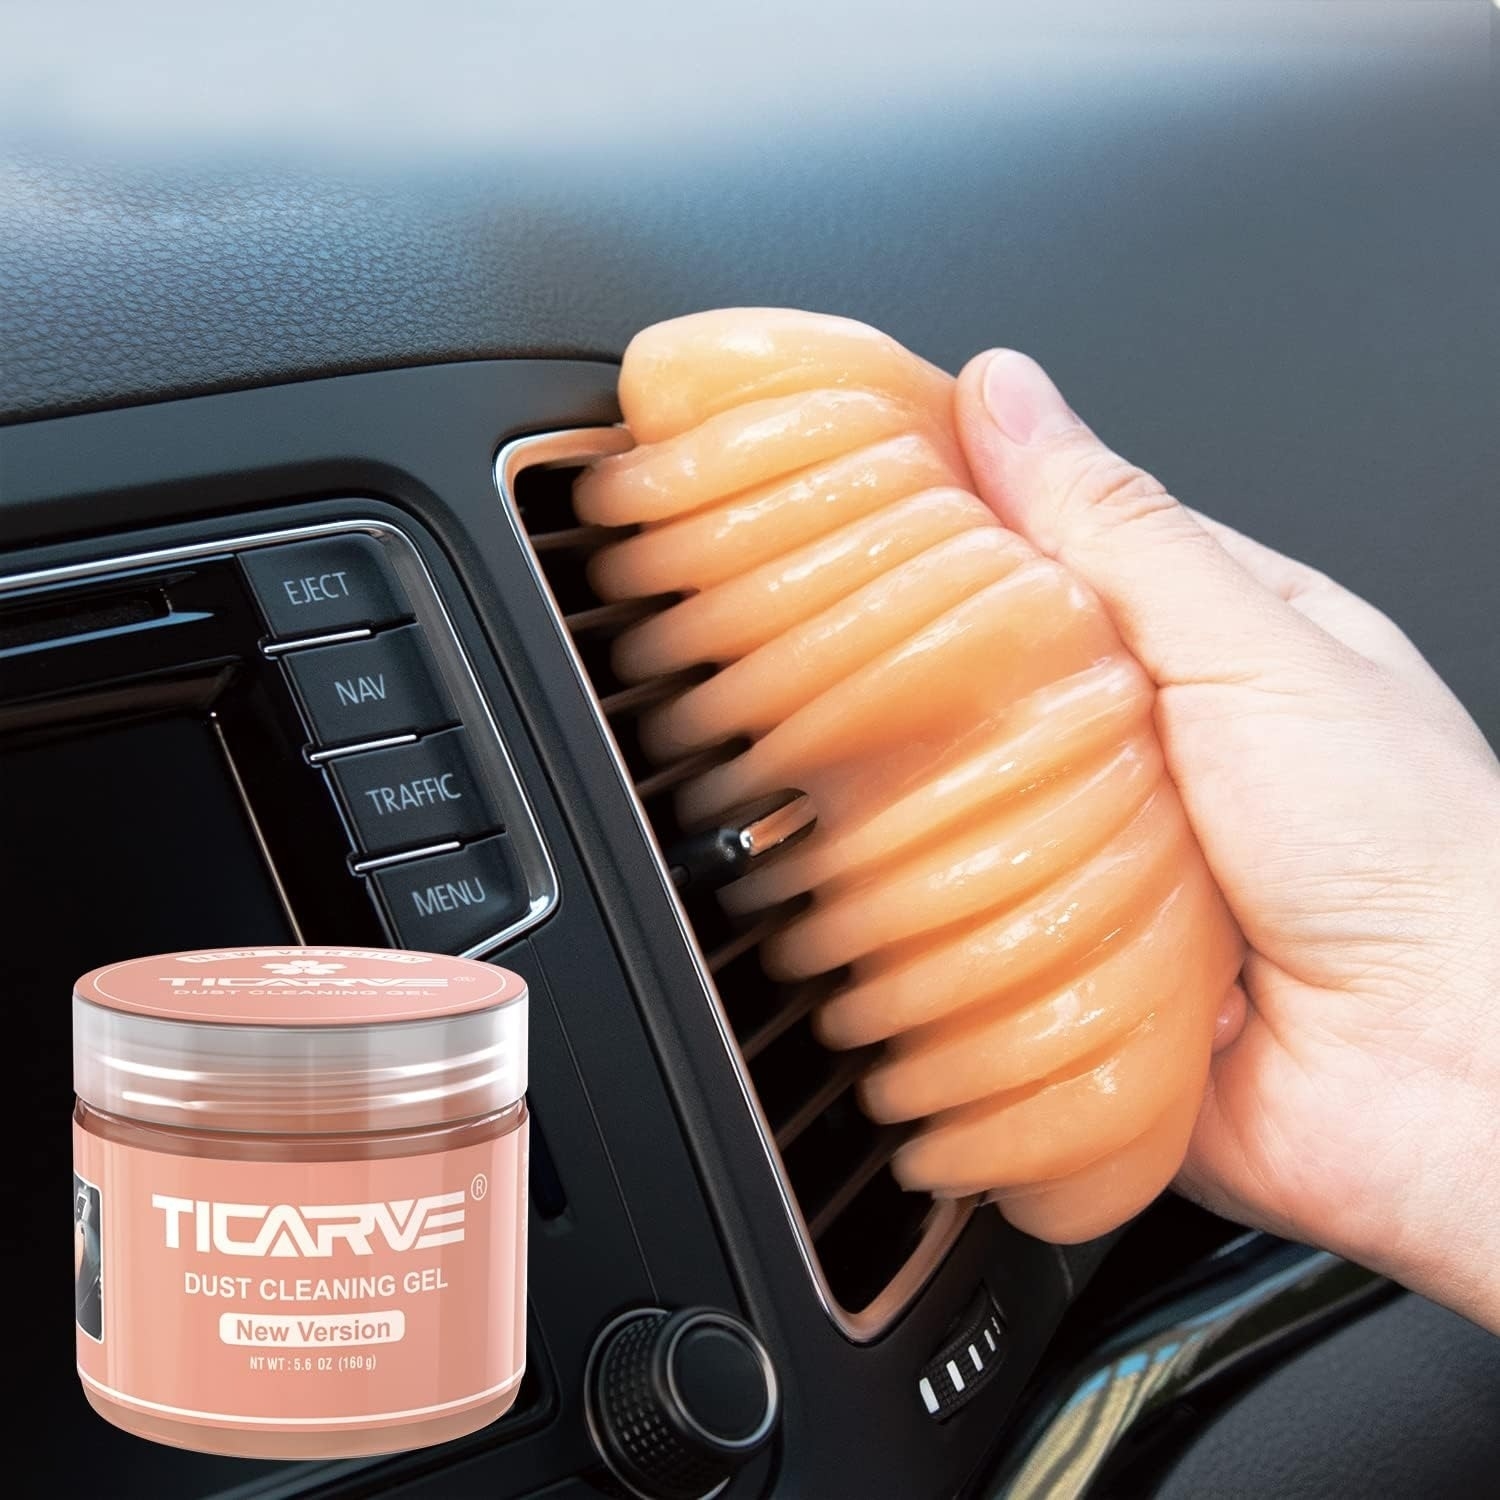 the orange cleaning gel being used to clean a car vent